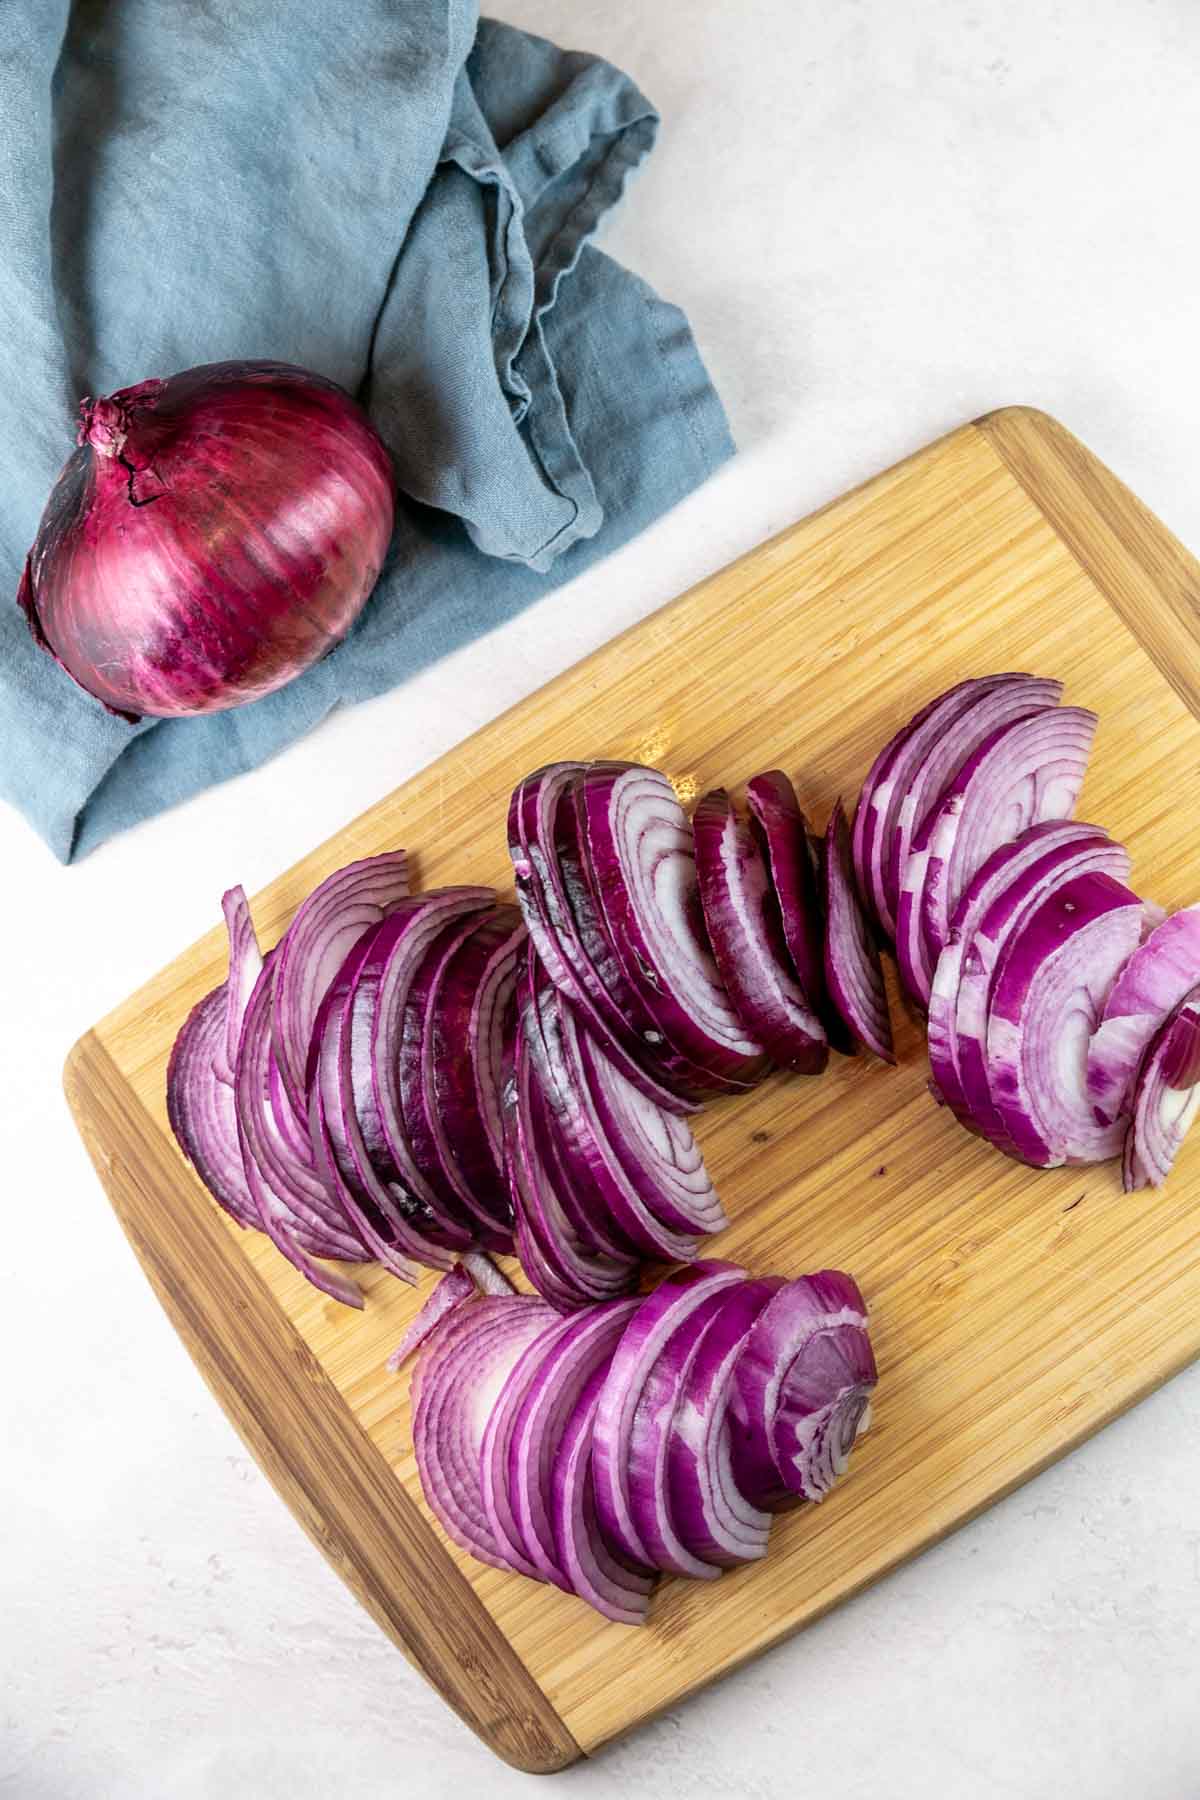 thiny sliced red onions on a wooden cutting board